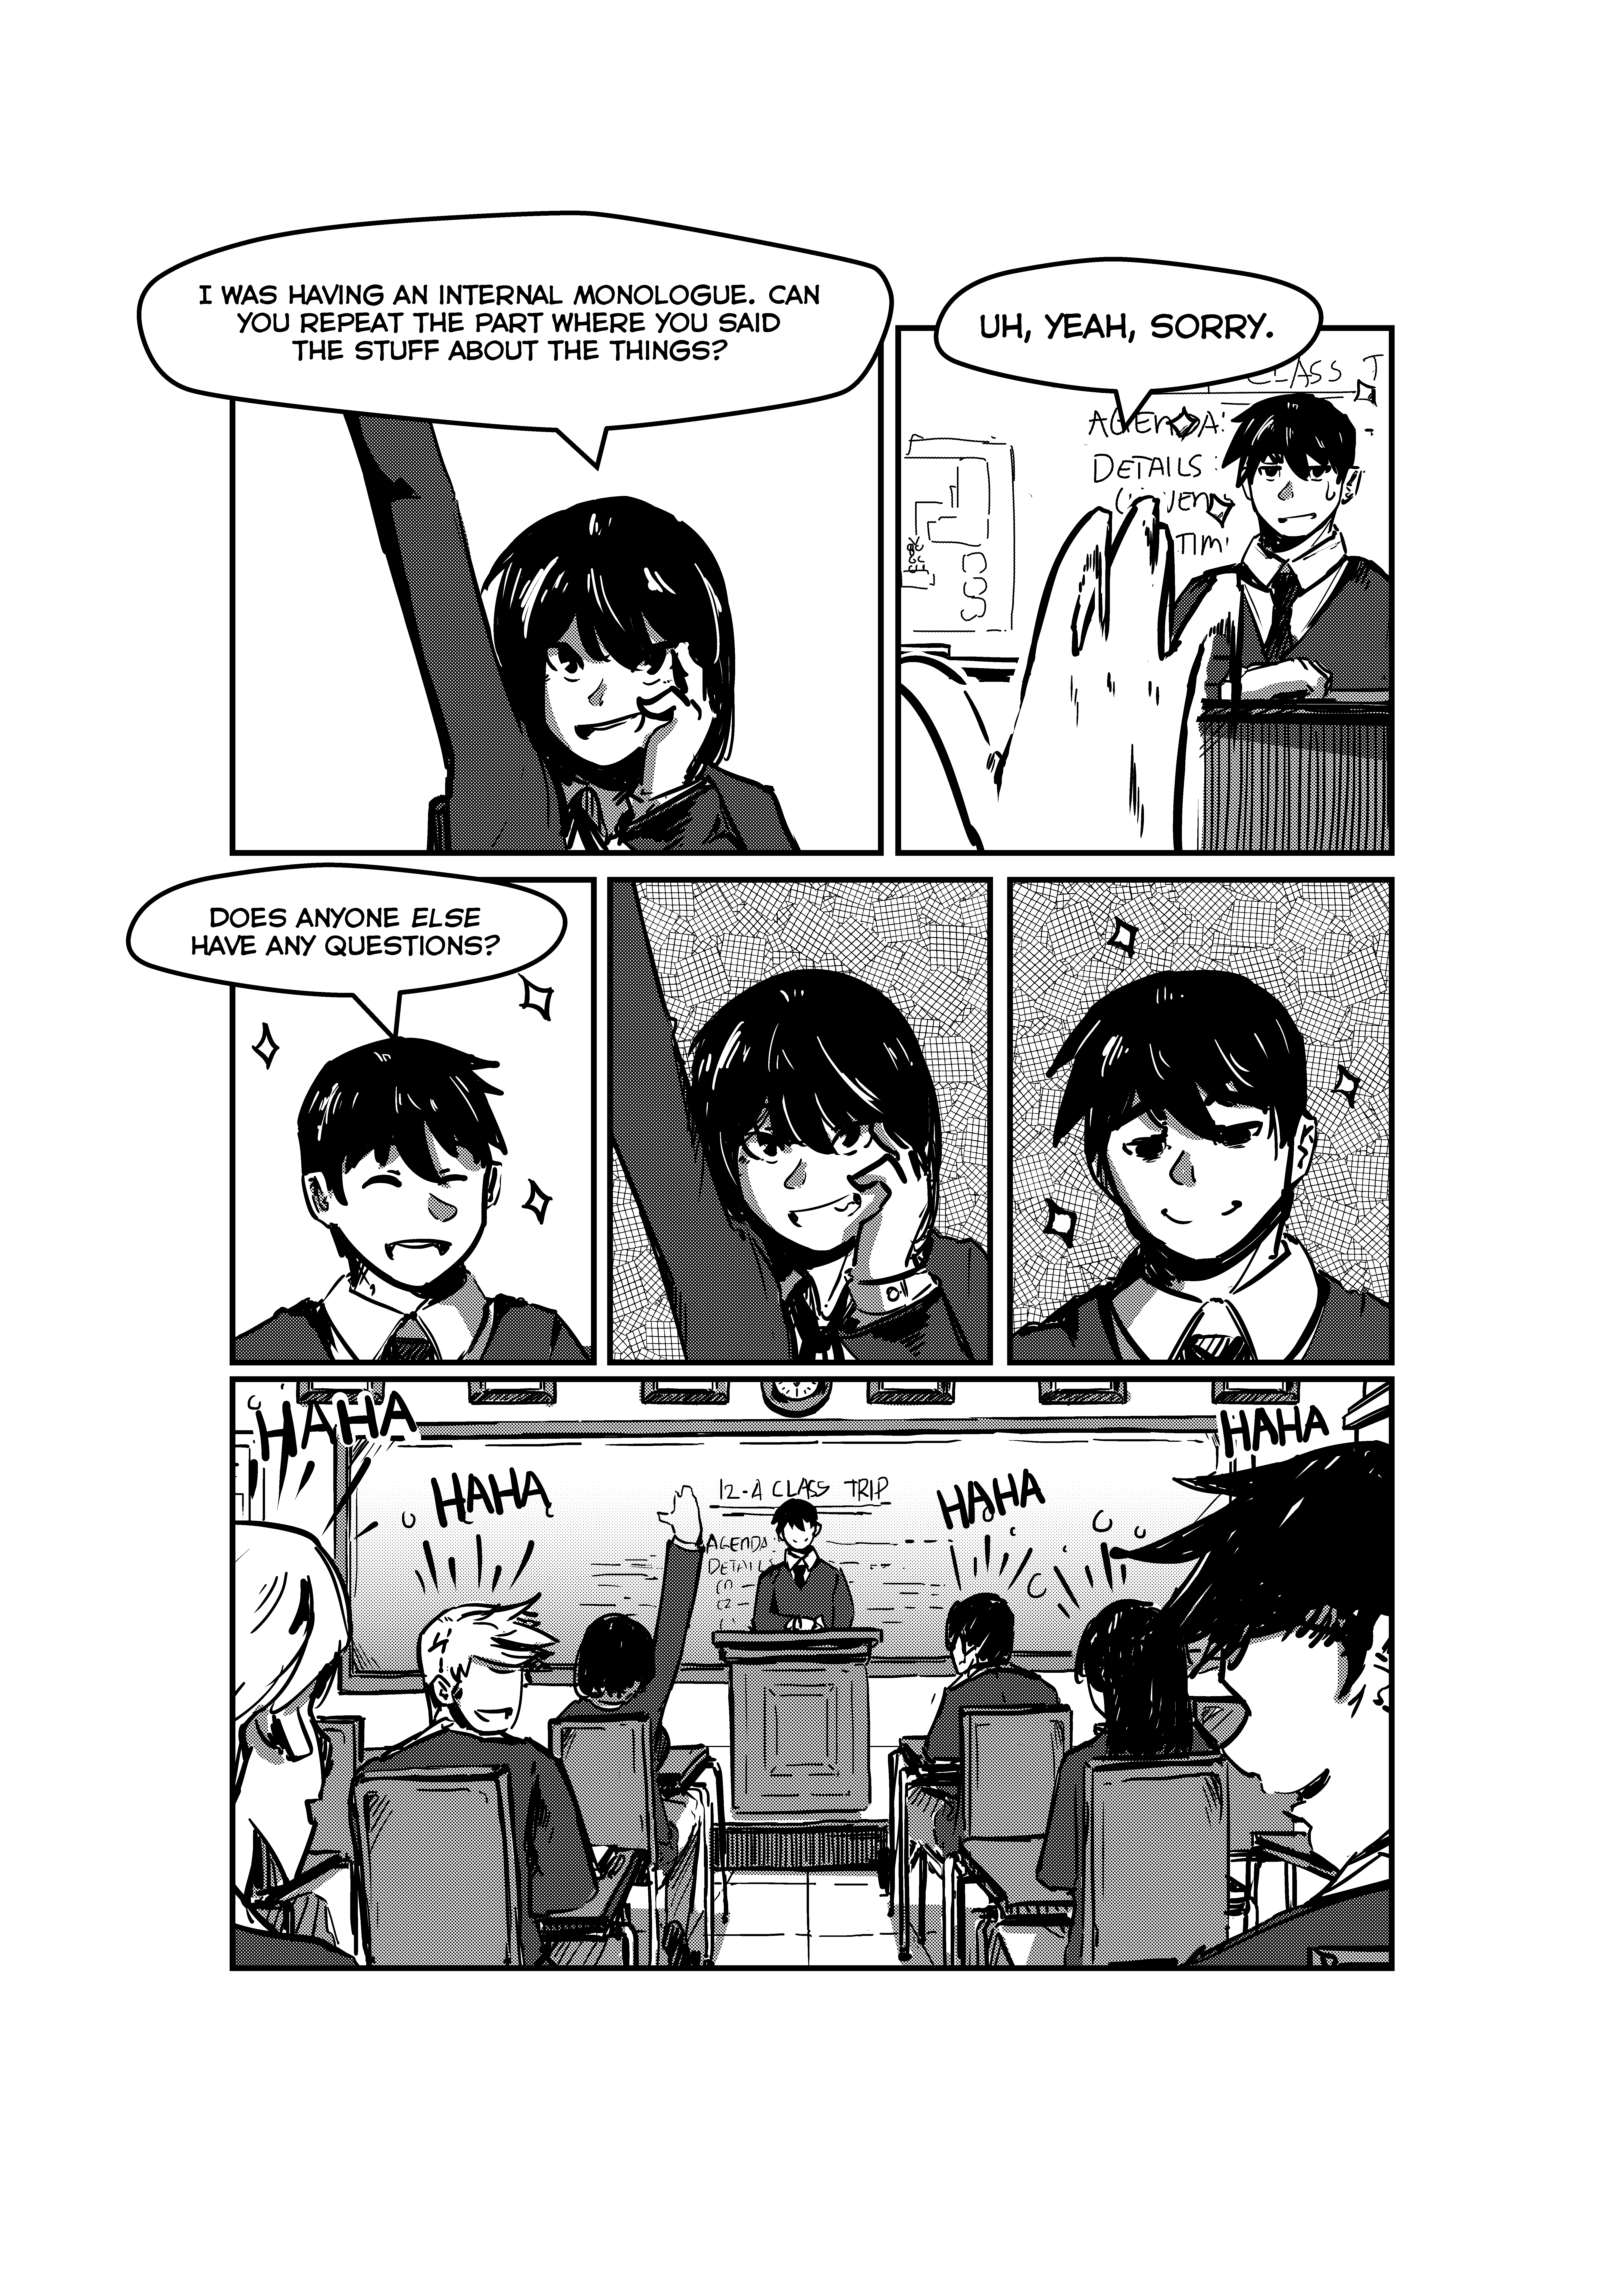 Opposites In Disguise - 11 page 7